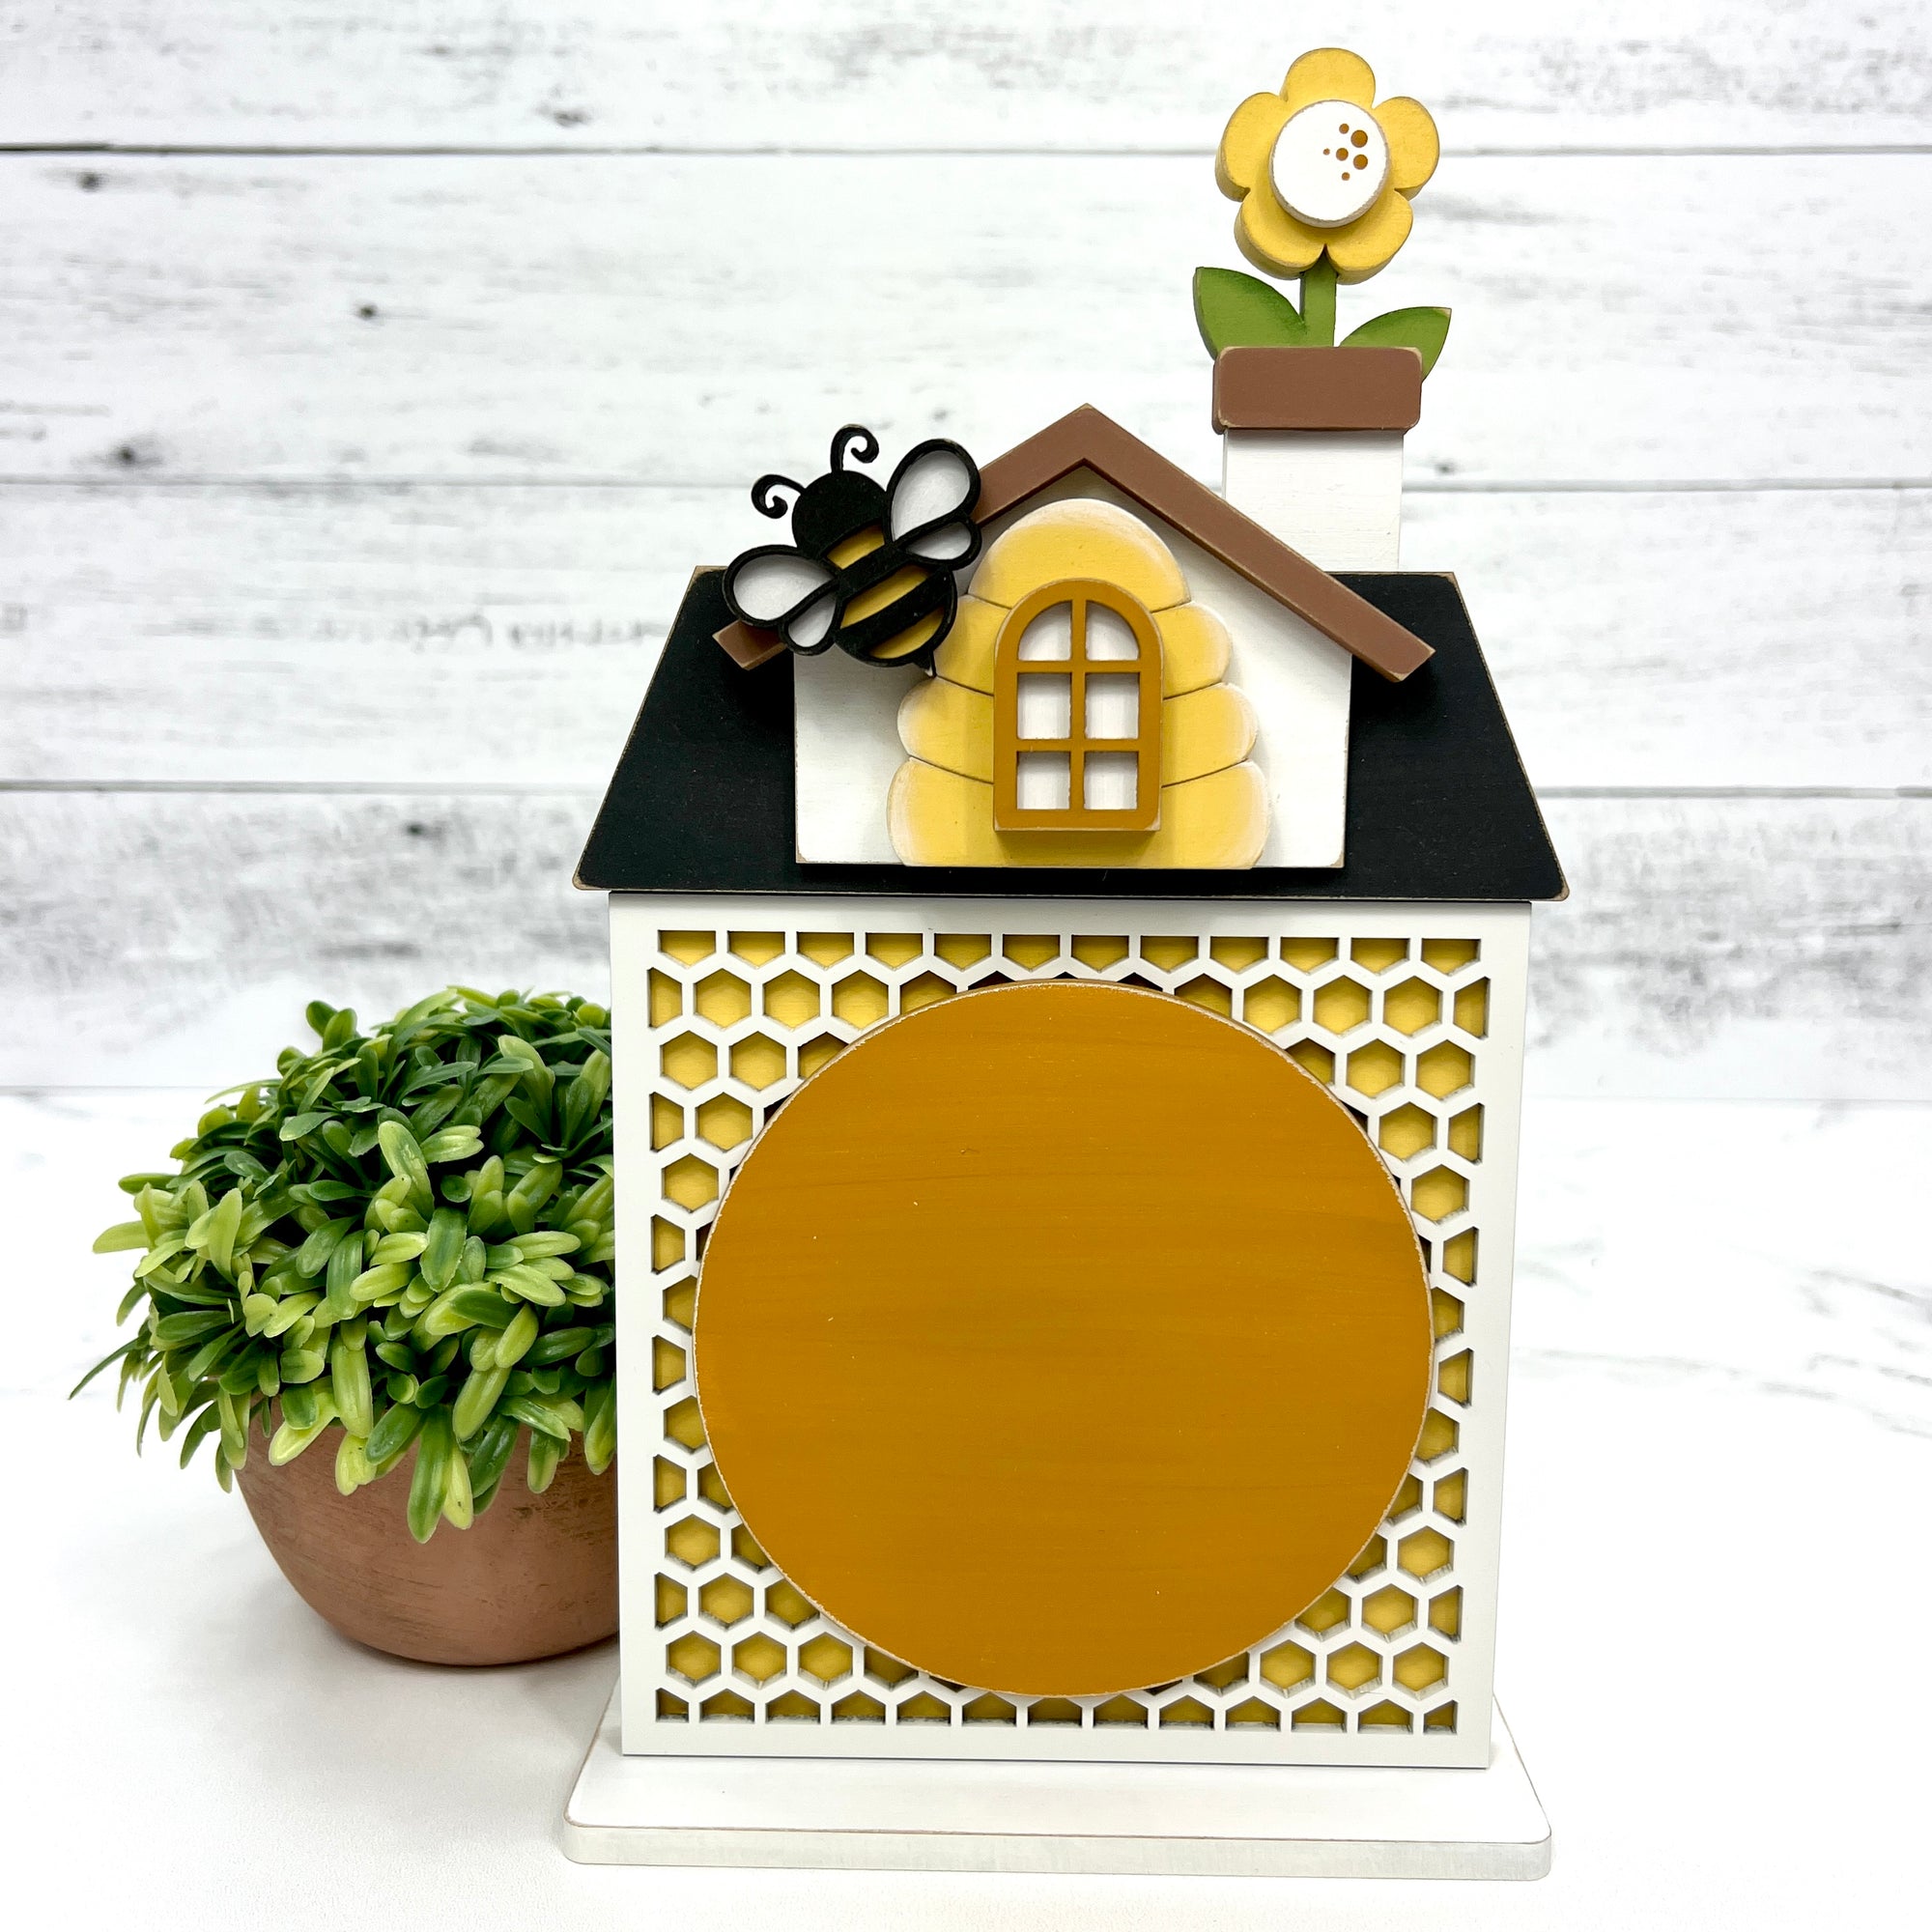 Honey bee themed house with honeycomb backing for displaying a finished cross stitch piece